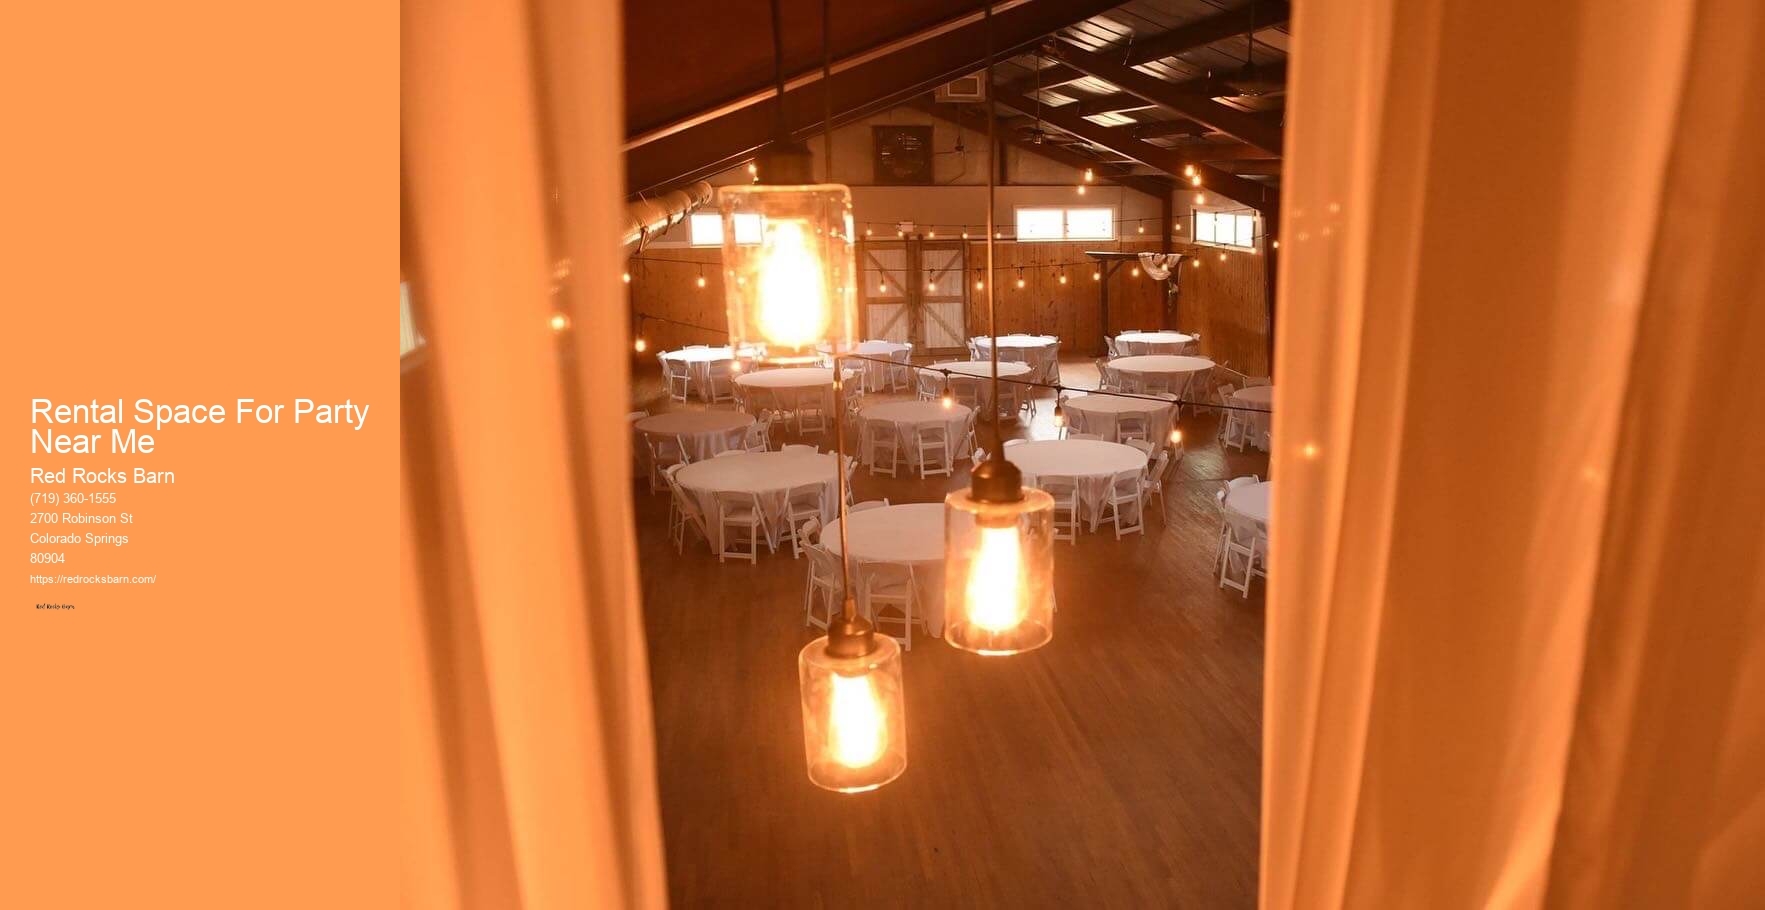 Rental Space For Party Near Me